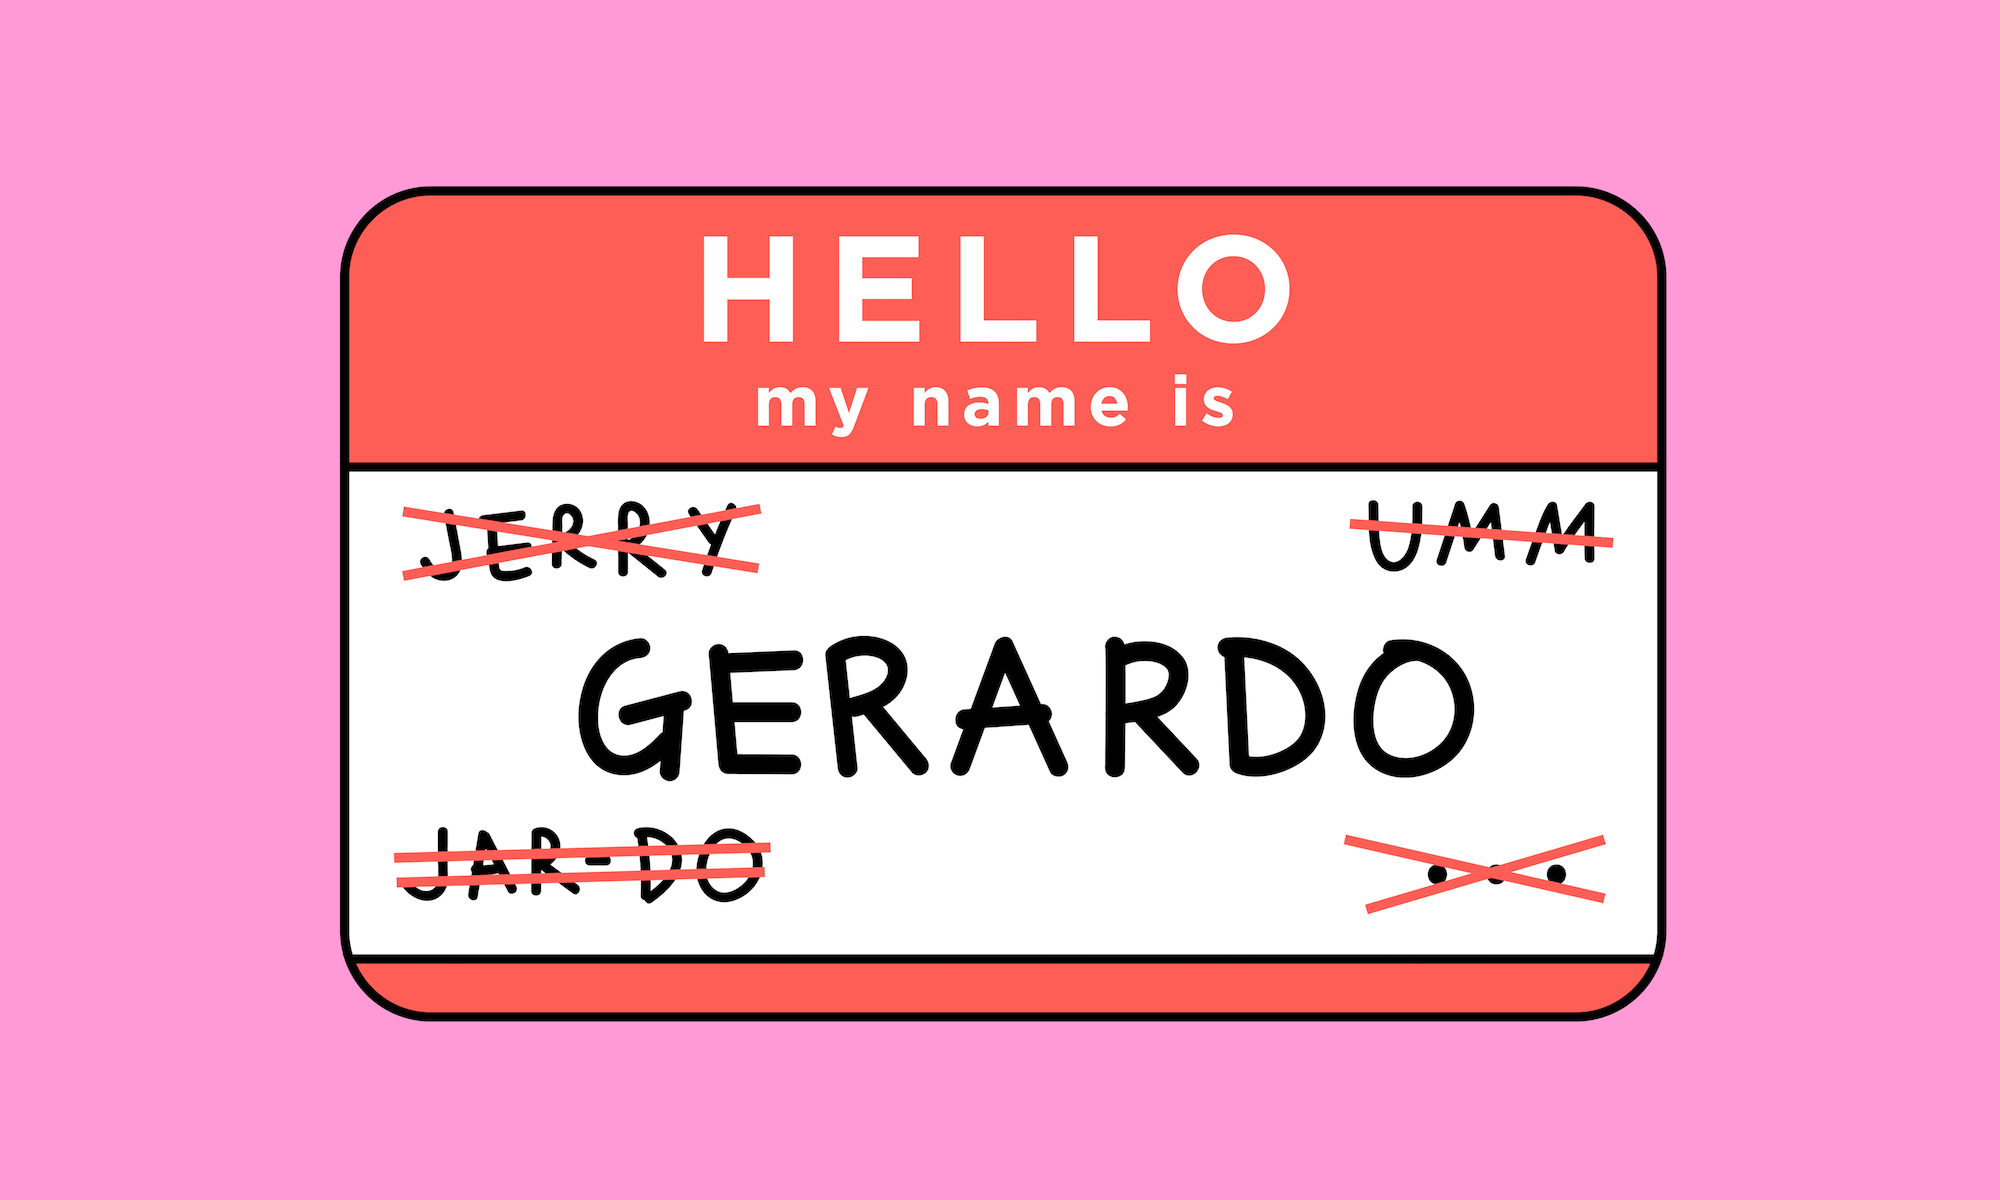 Have you mispronounced someone’s name? Here’s what to do next